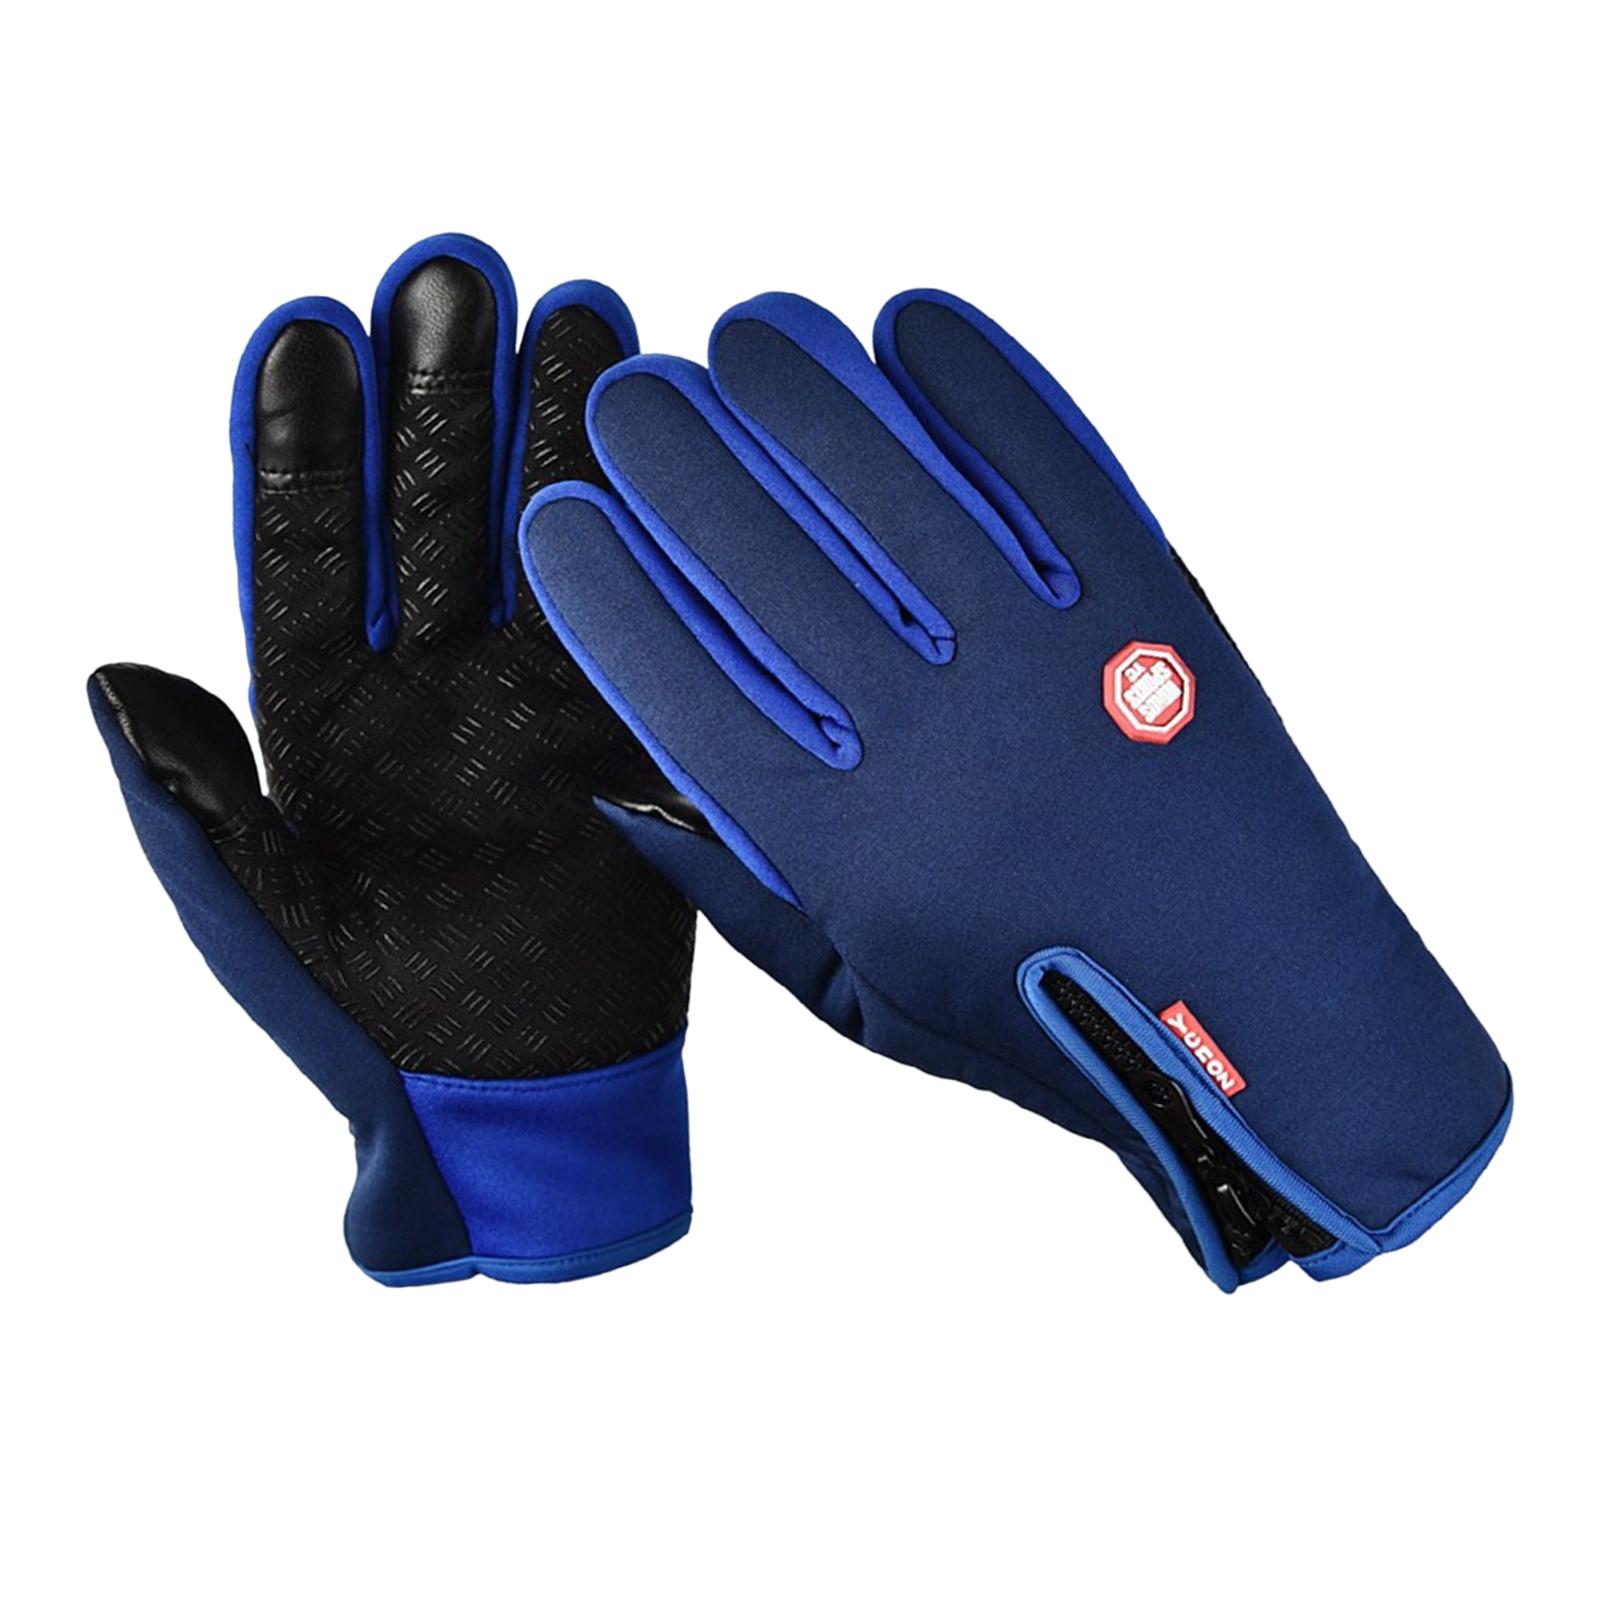 Winter Gloves Nonslip Thermal Gloves for Outdoor Running Sports Motorcycle S Blue